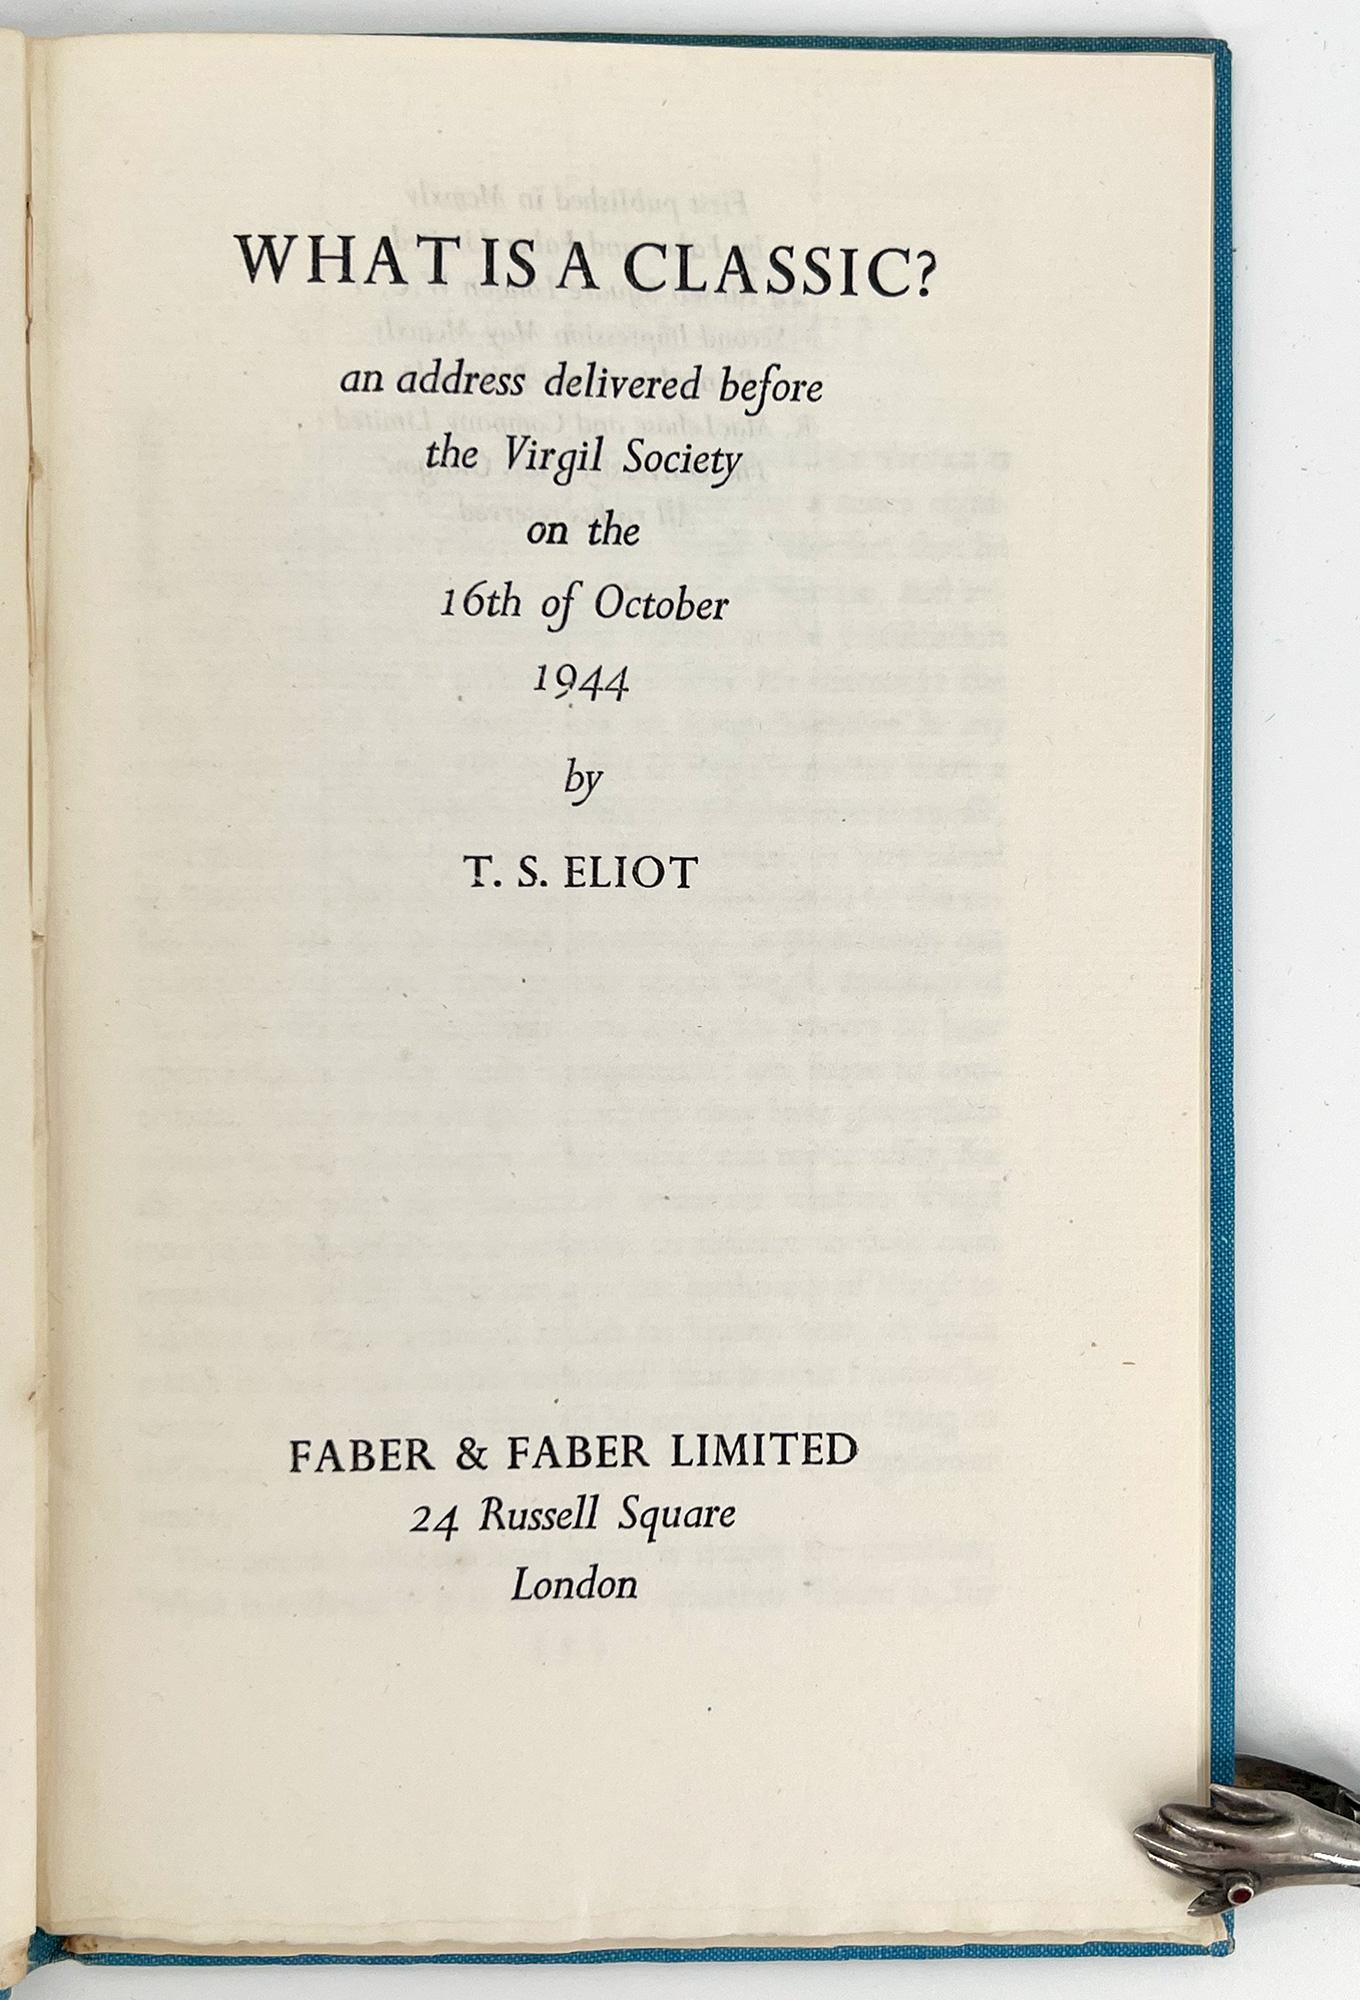 First Edition, Second Impression. of An address delivered before the Virgil Society on the 16th of October 1944. 
London: Faber and Faber, 1945.  
8vo; 8 1/4 x 5 3/8 inches (218 x 135 mm); 32 pp., printed on heavy laid paper, lower edges uncut.